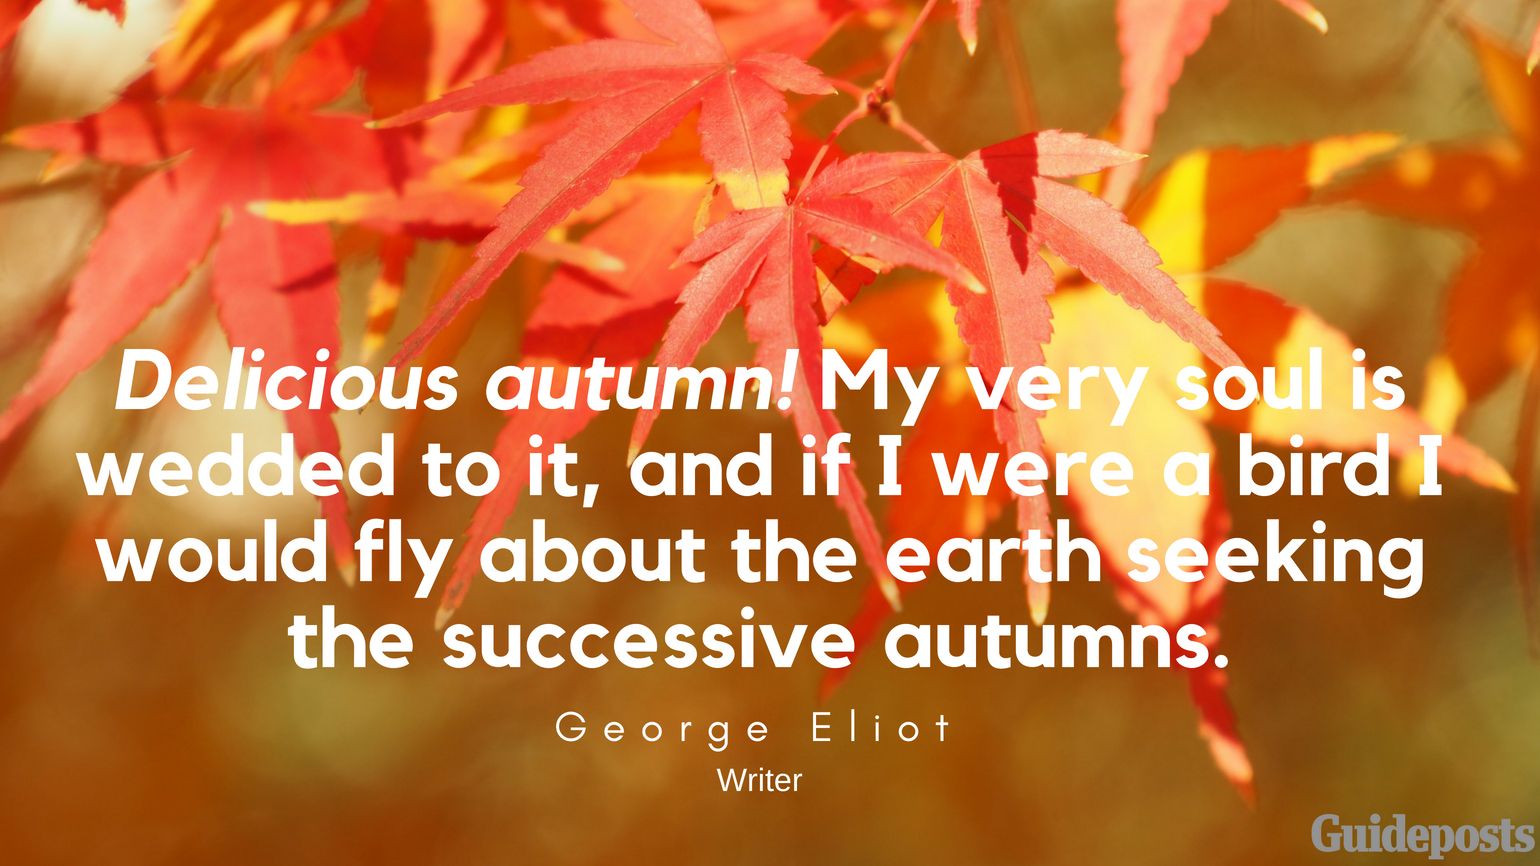 Delicious autumn! My very soul is wedded to it, and if I were a bird I would fly about the earth seeking the successive autumns. —George Eliot